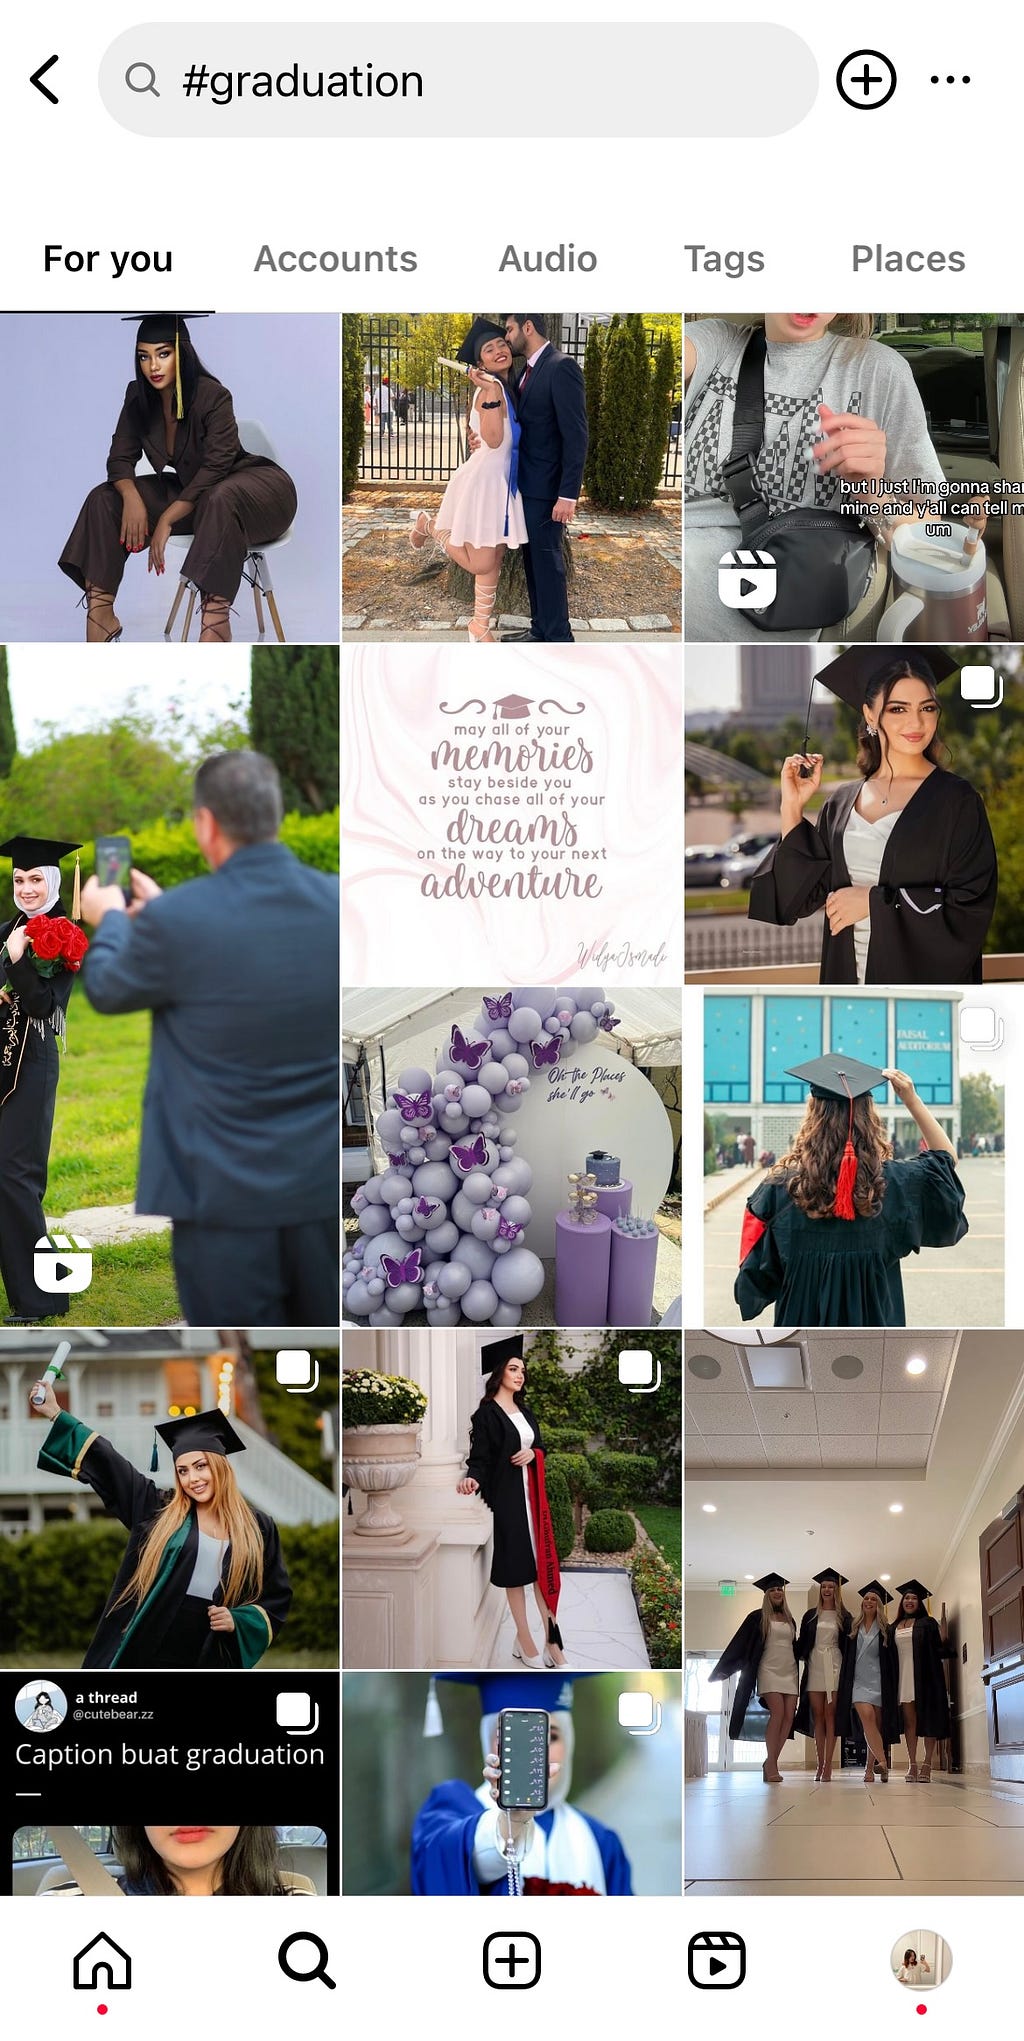 search results for #graduationdress on Instagram